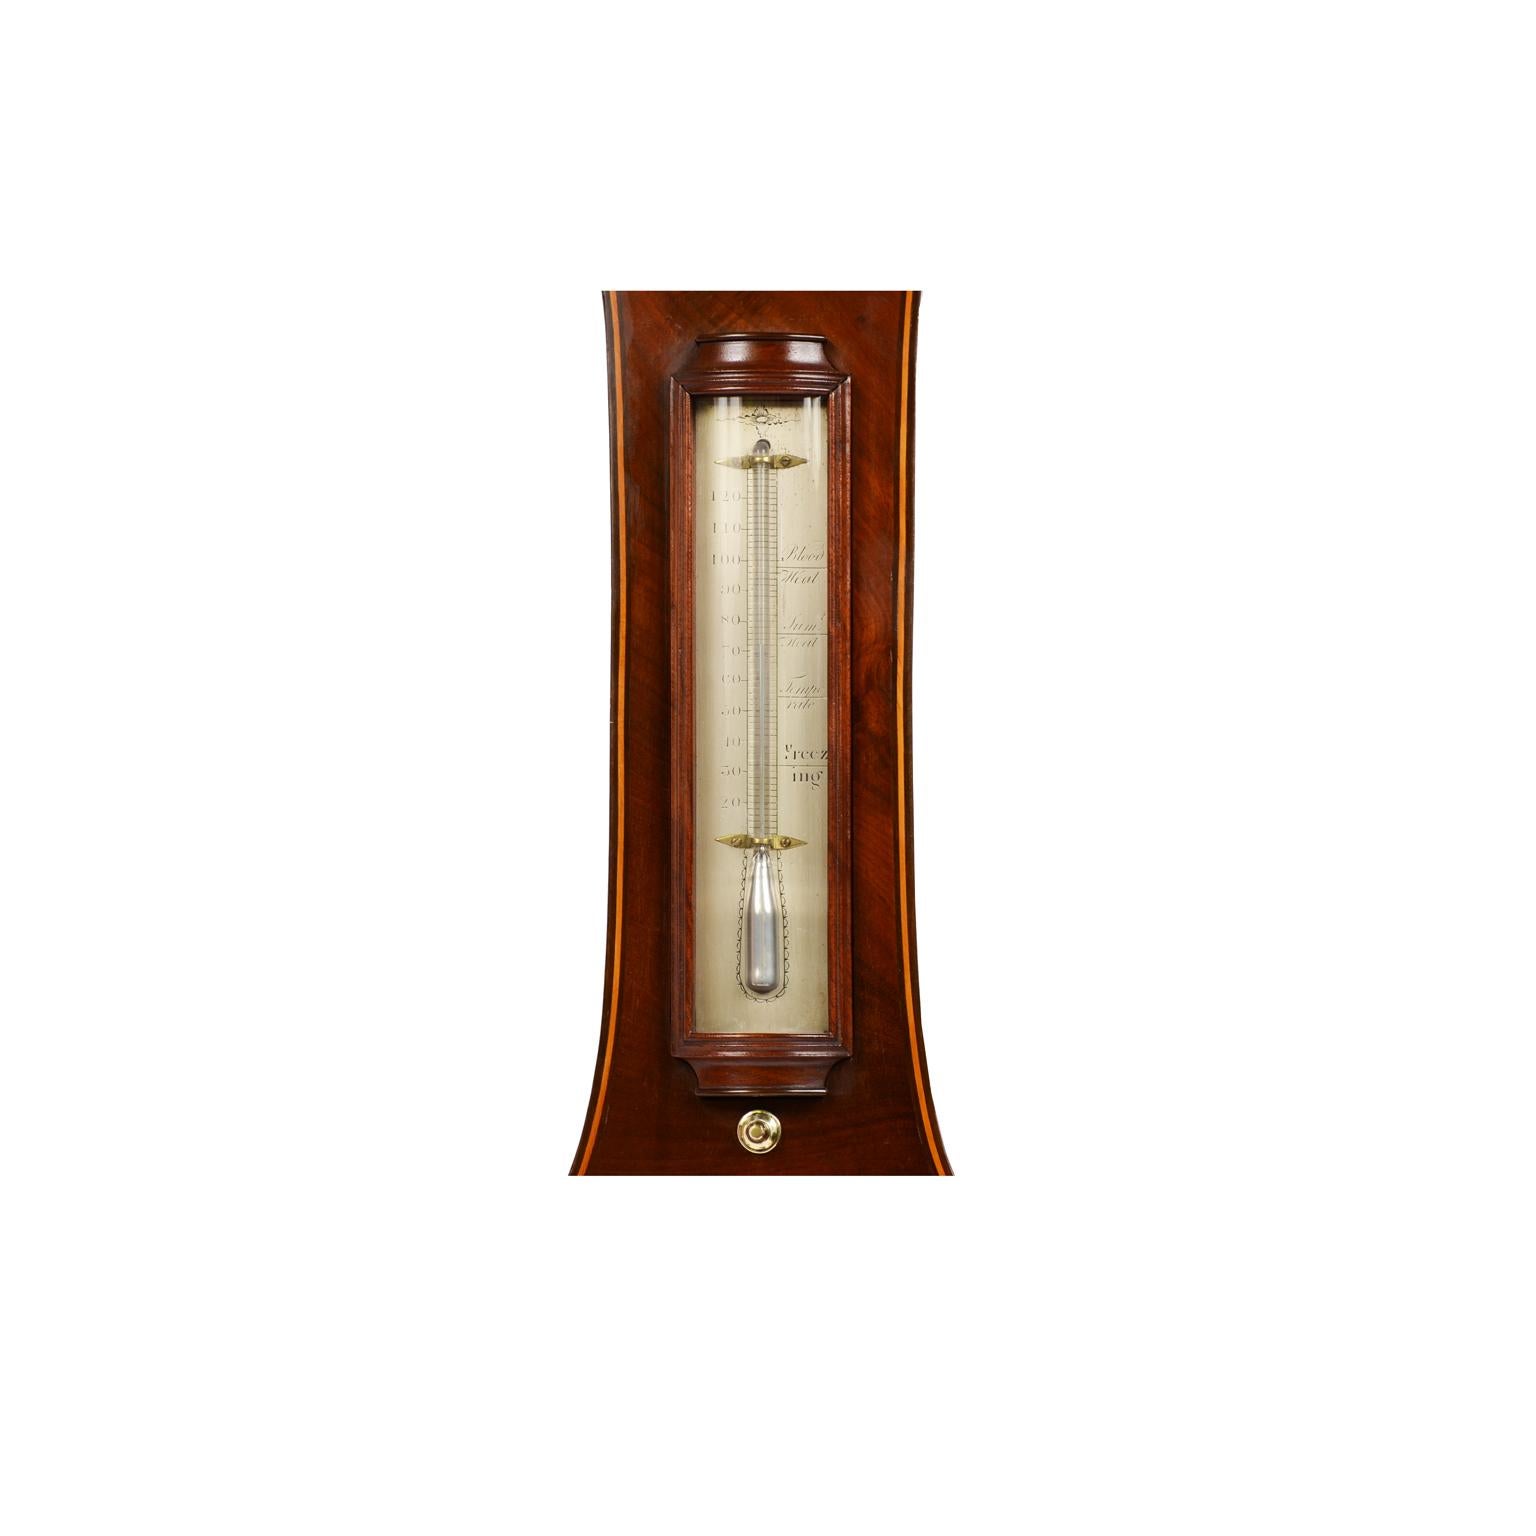 19th Century Mahogany Barometer F Somalvico Antique Weather Measuring Instrument In Good Condition For Sale In Milan, IT